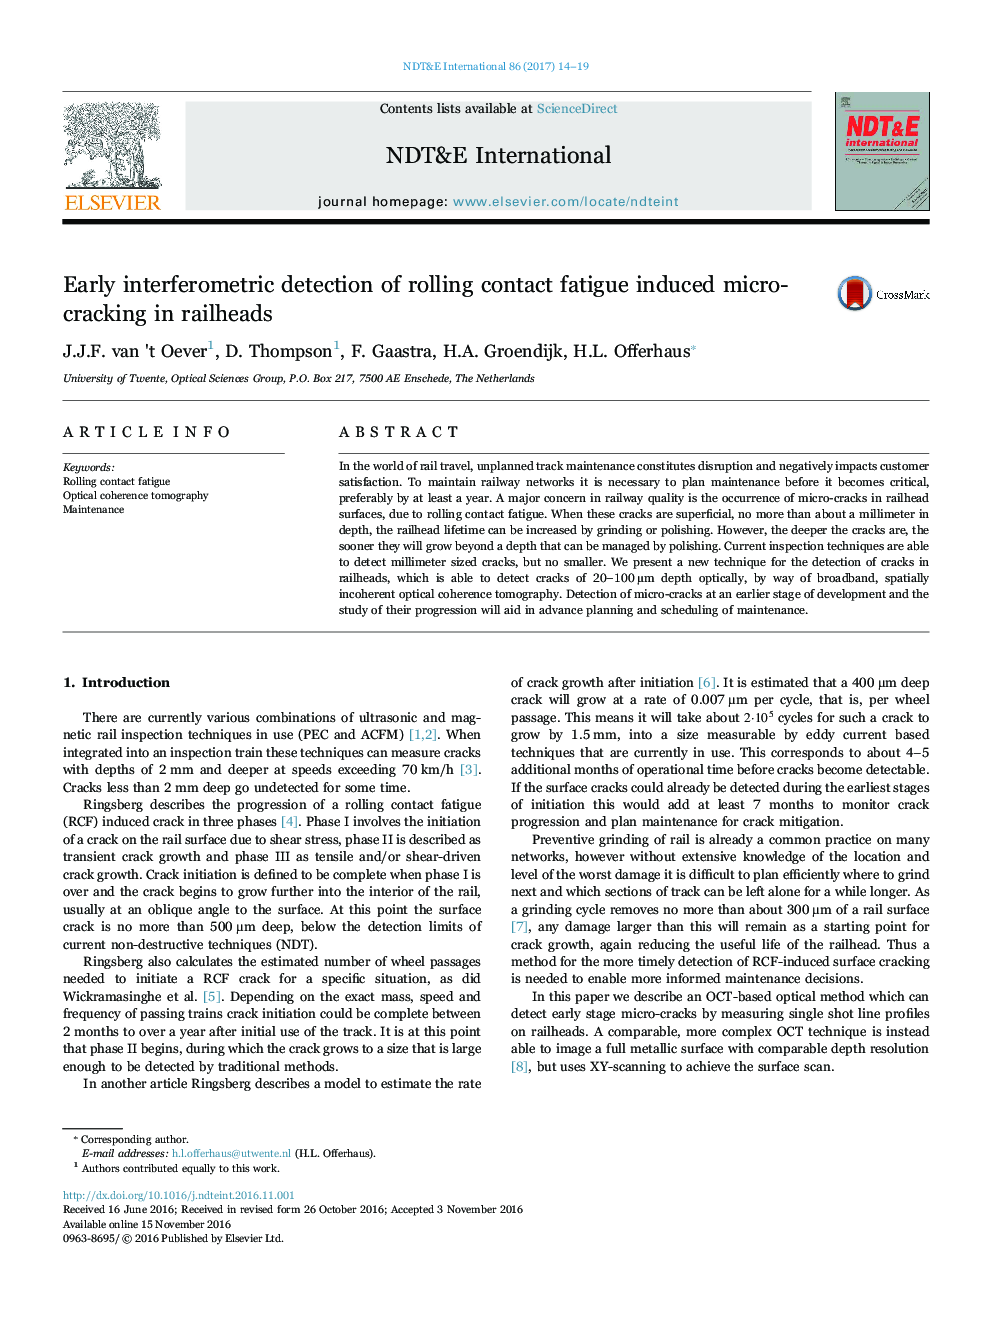 Early interferometric detection of rolling contact fatigue induced micro-cracking in railheads